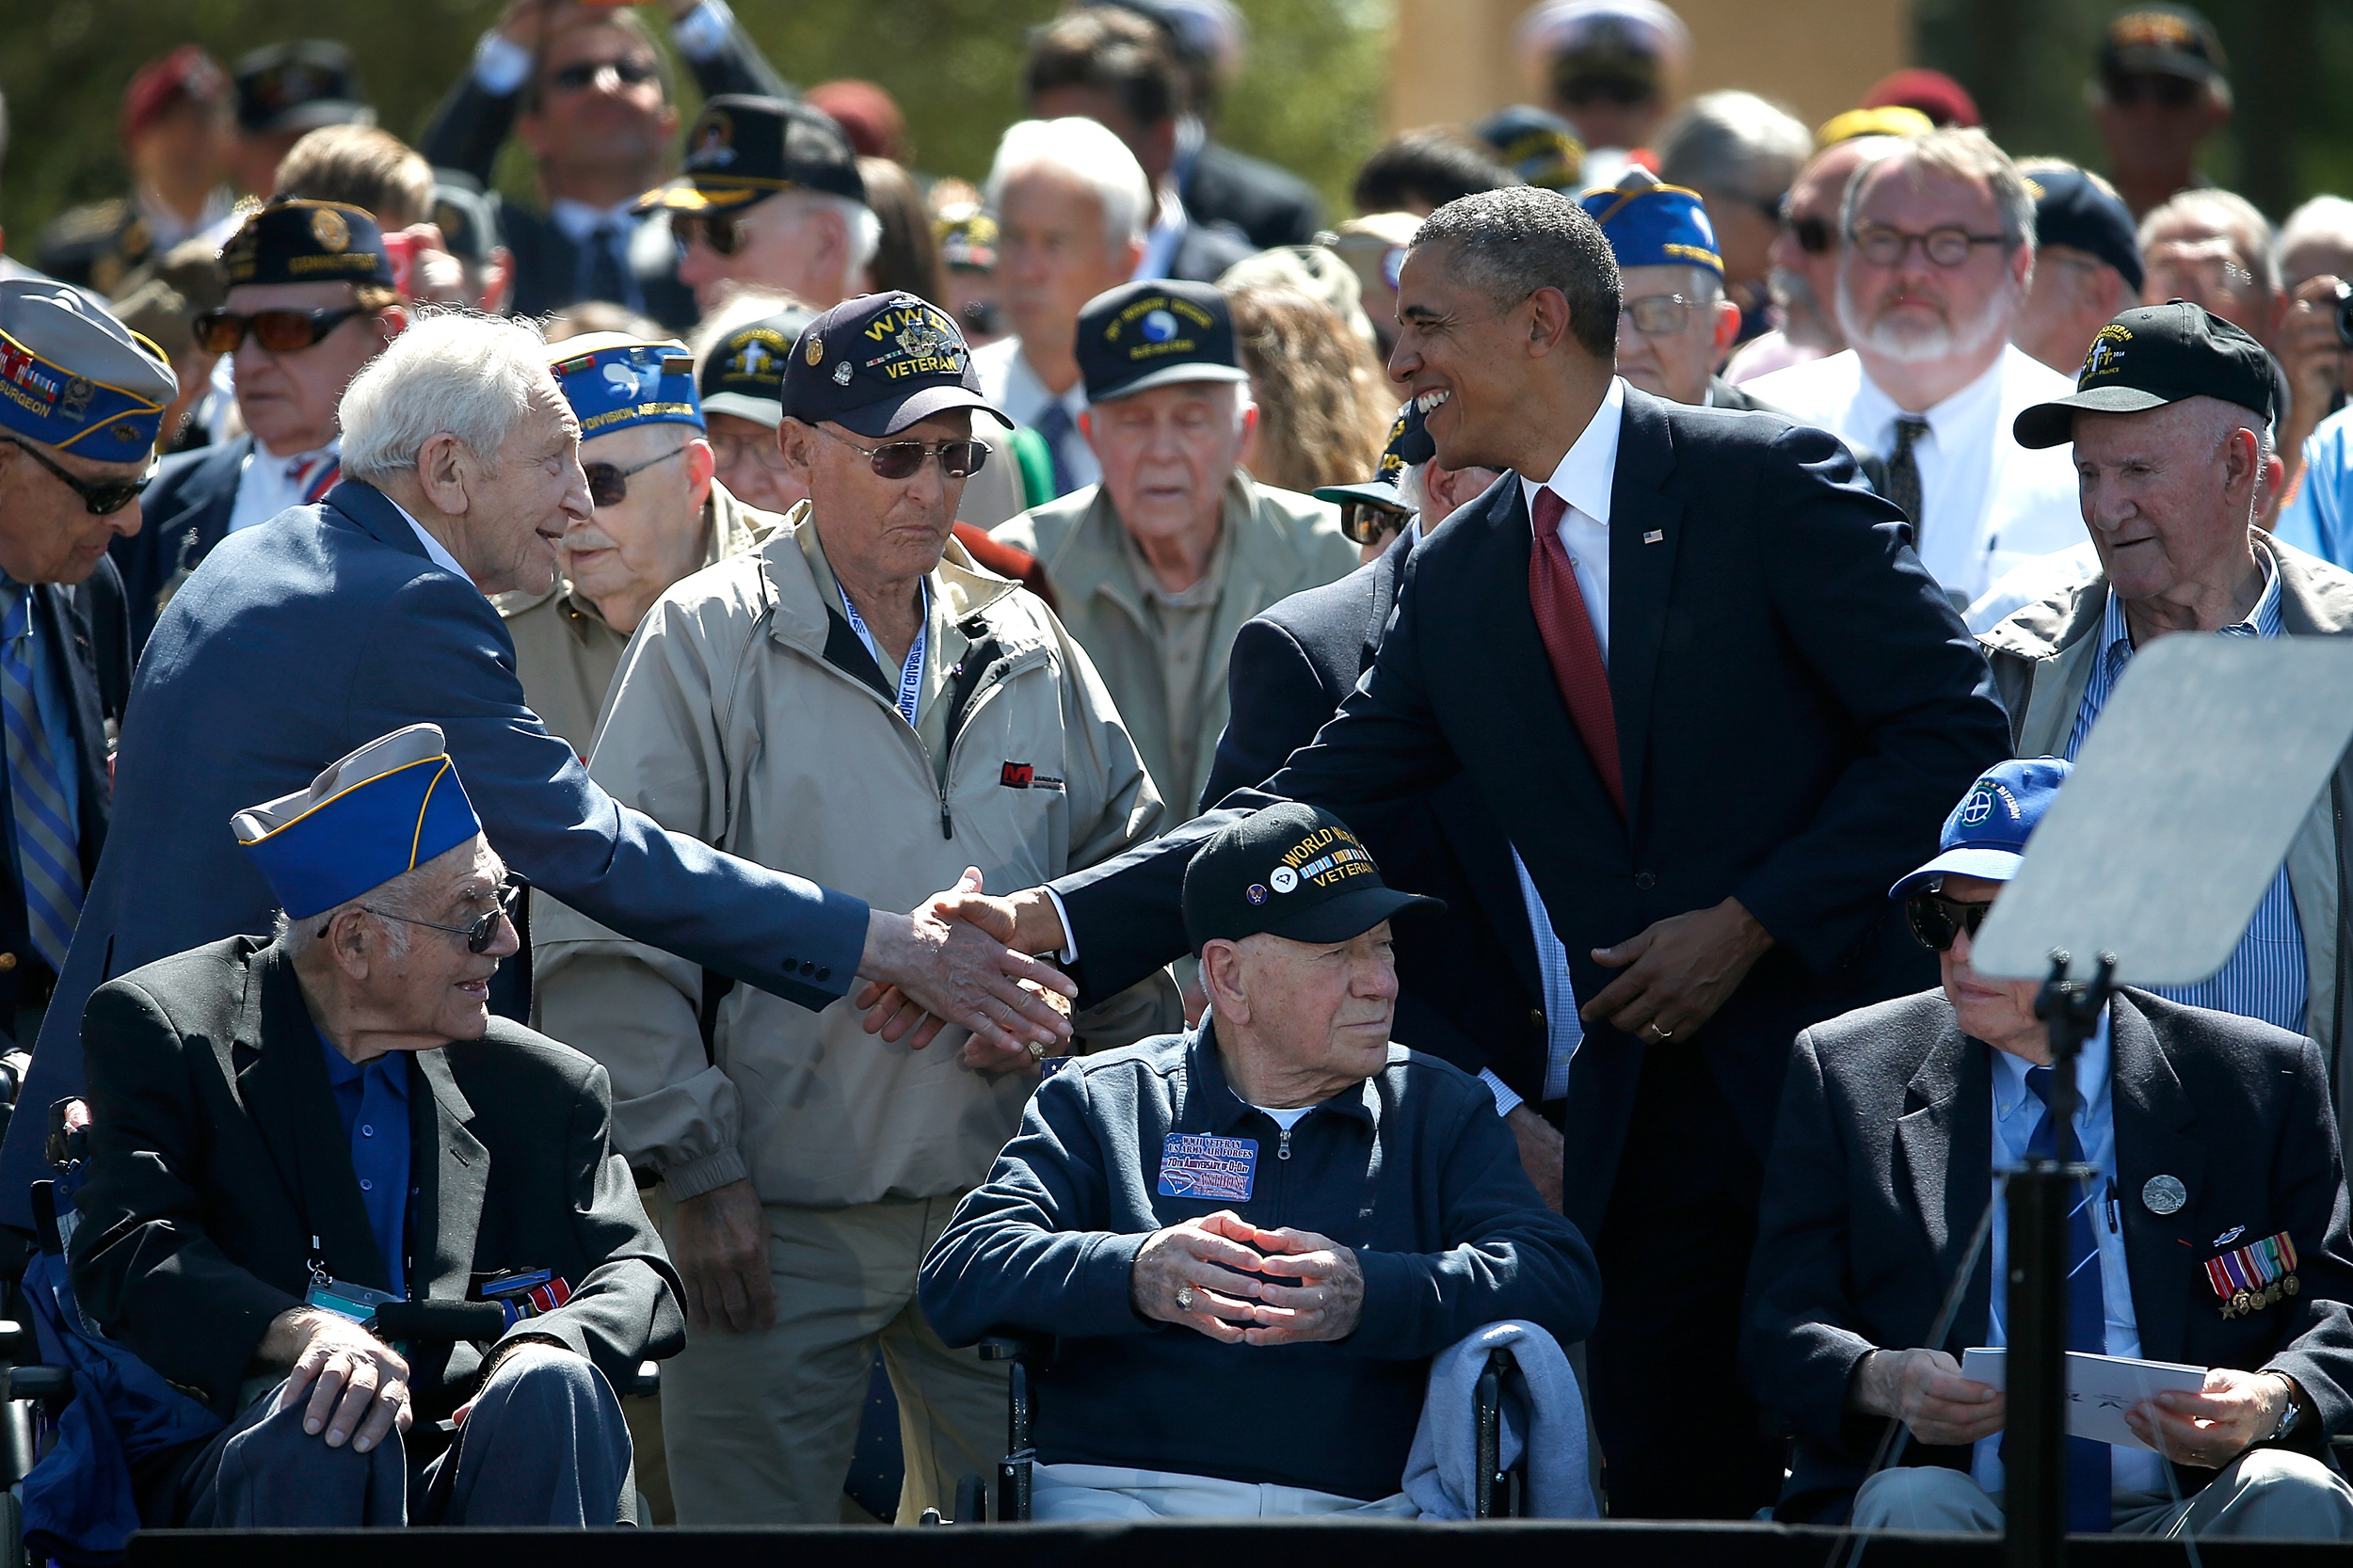 Barack Obama shakes hands with D-Day veterans.